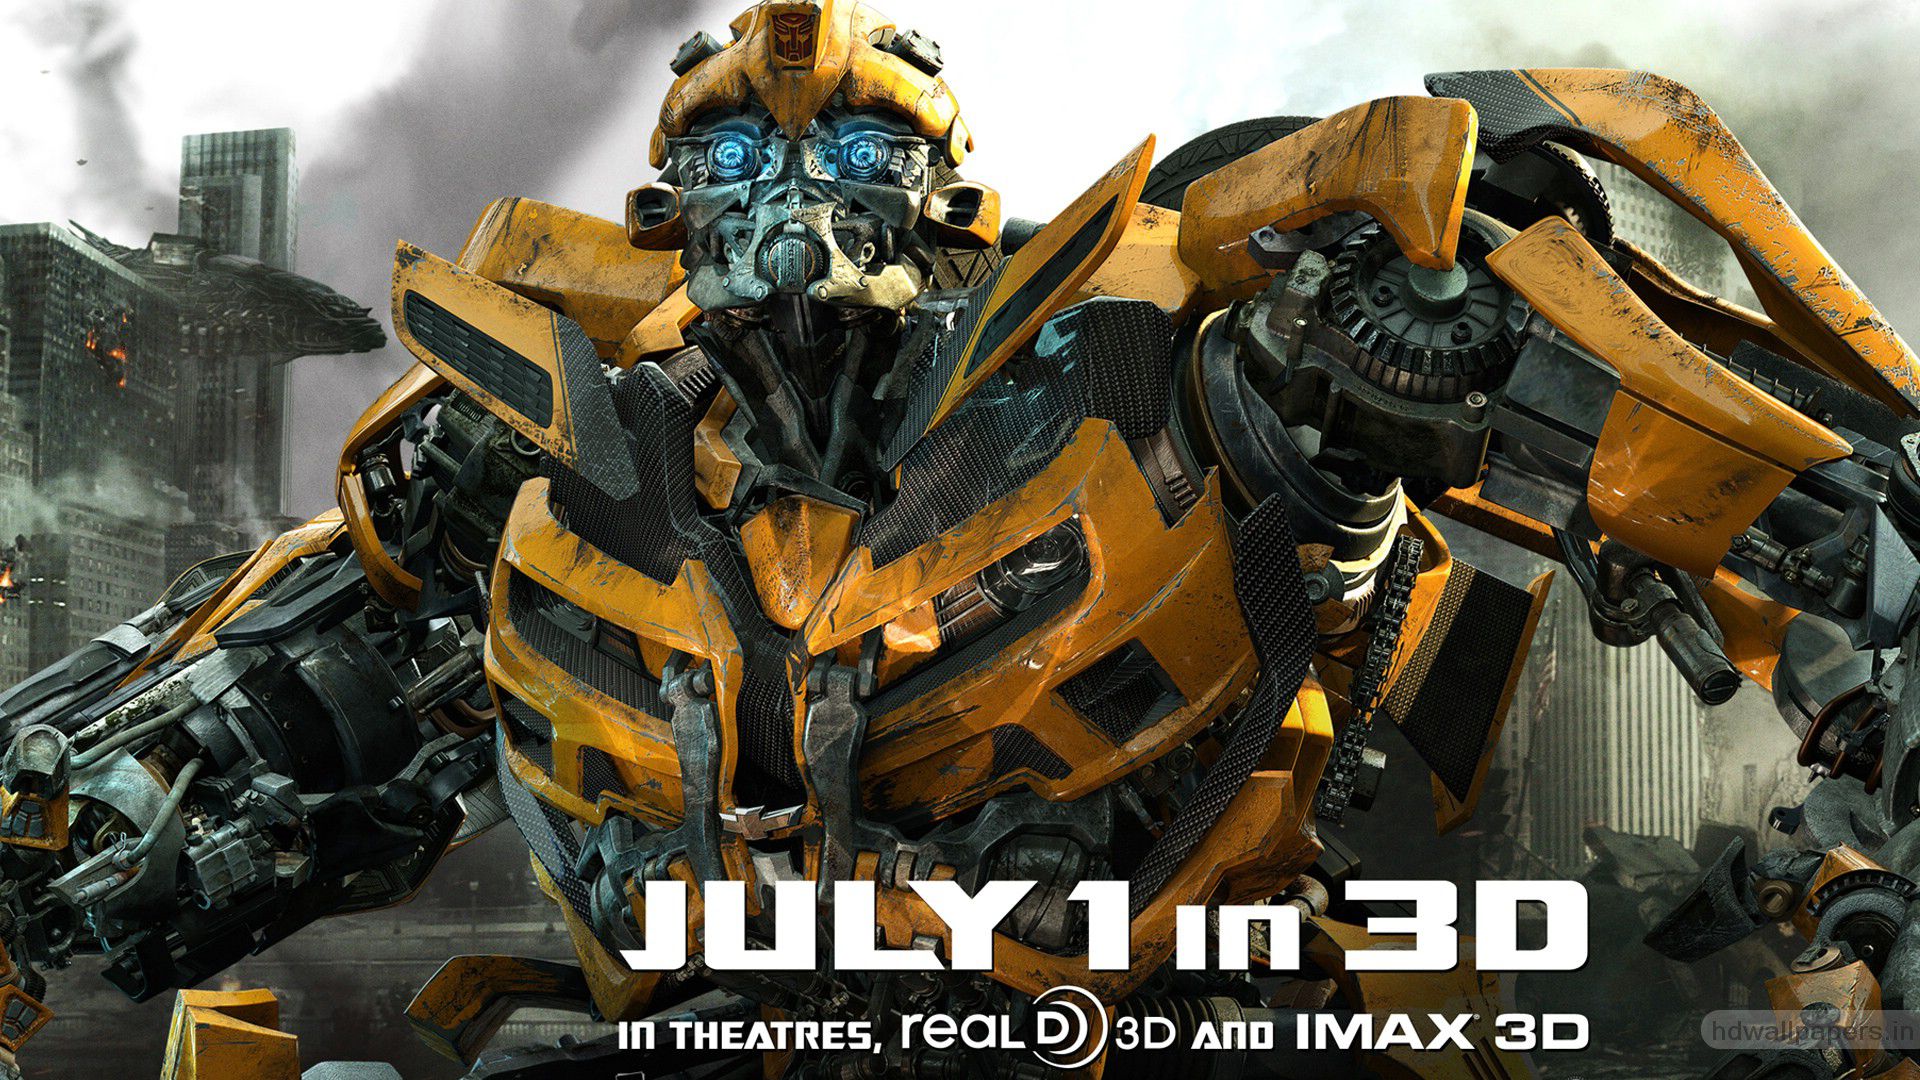 HD Wallpapers Of Bumblebee Autobot In Transformers Movie  WallpaperCare